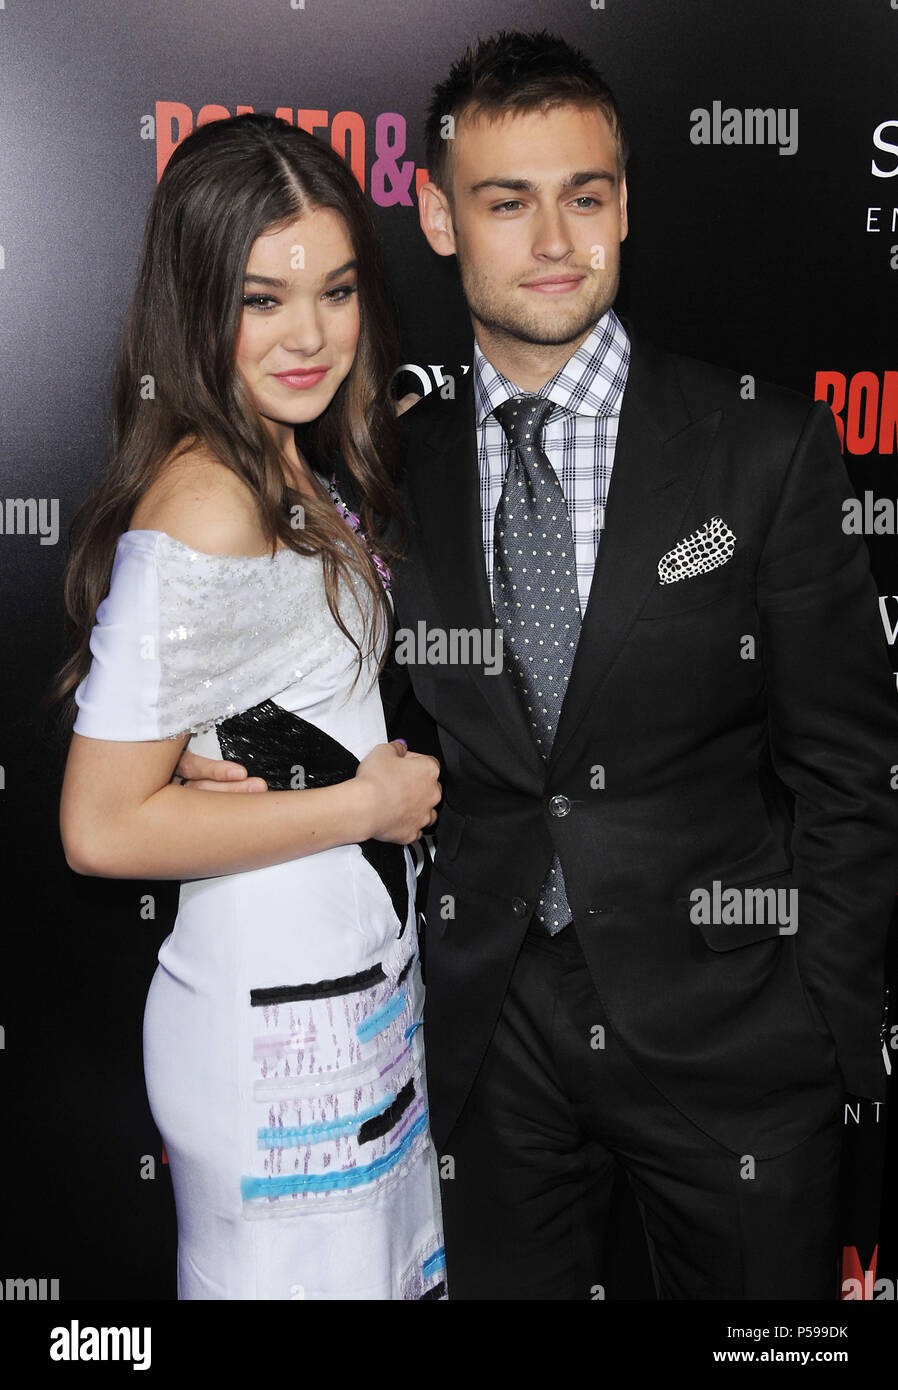 Hailee Steinfeld,  Douglas Booth  arriving at the Romeo & Juliet Premiere at the Arclight Theatre In Los Angeles.Hailee Steinfeld,  Douglas Booth 132 ------------- Red Carpet Event, Vertical, USA, Film Industry, Celebrities,  Photography, Bestof, Arts Culture and Entertainment, Topix Celebrities fashion /  Vertical, Best of, Event in Hollywood Life - California,  Red Carpet and backstage, USA, Film Industry, Celebrities,  movie celebrities, TV celebrities, Music celebrities, Photography, Bestof, Arts Culture and Entertainment,  Topix, vertical,  family from from the year , 2013, inquiry tsuni@ Stock Photo